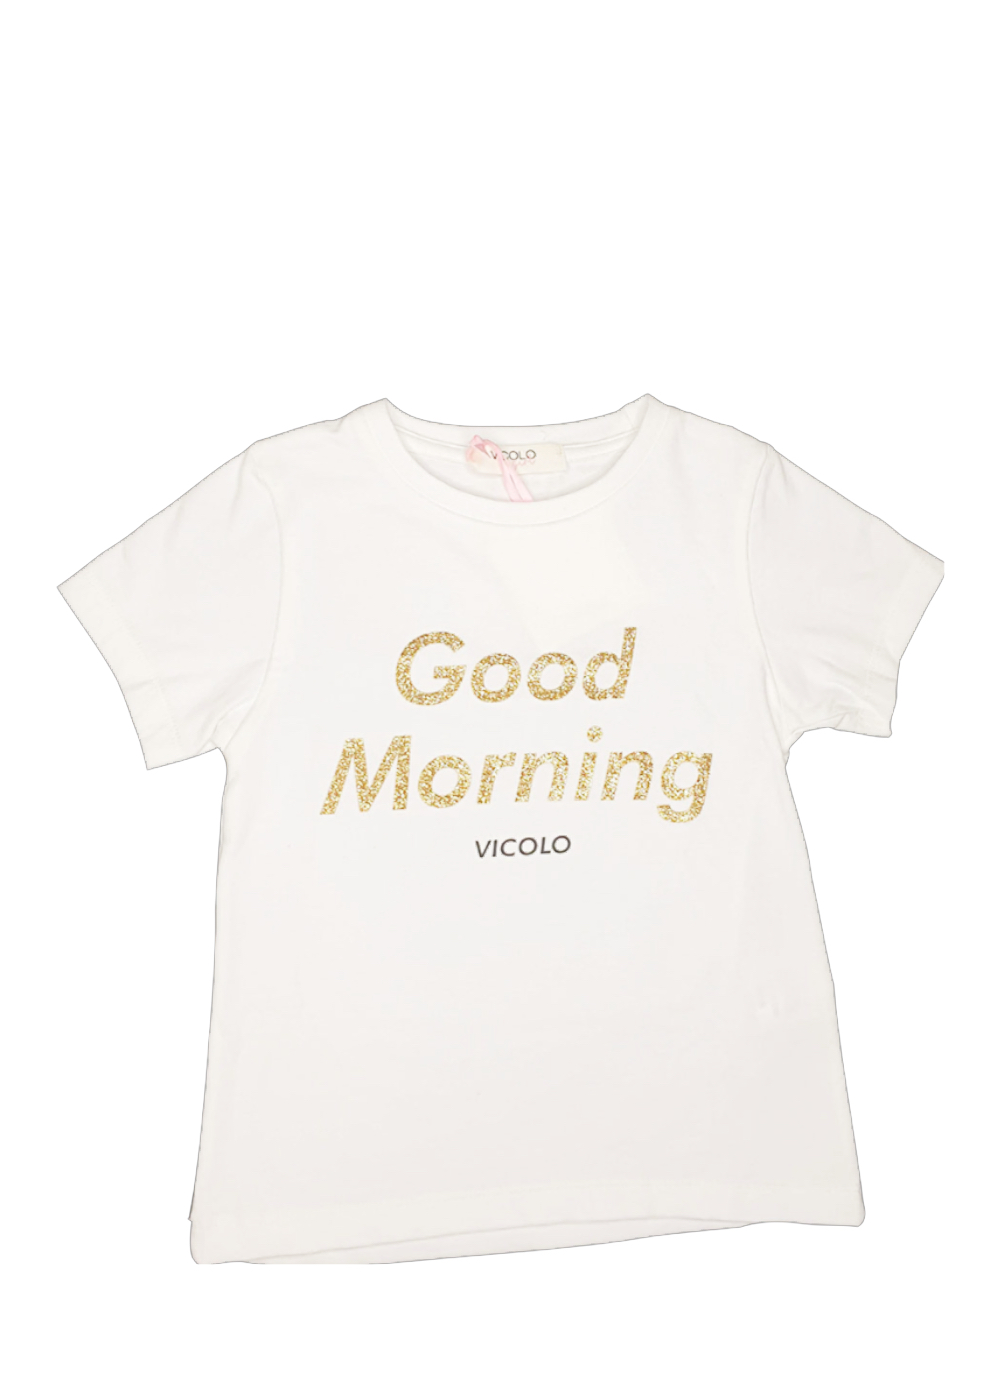 Featured image for “VICOLO T-SHIRT "GOOD MORNING"”